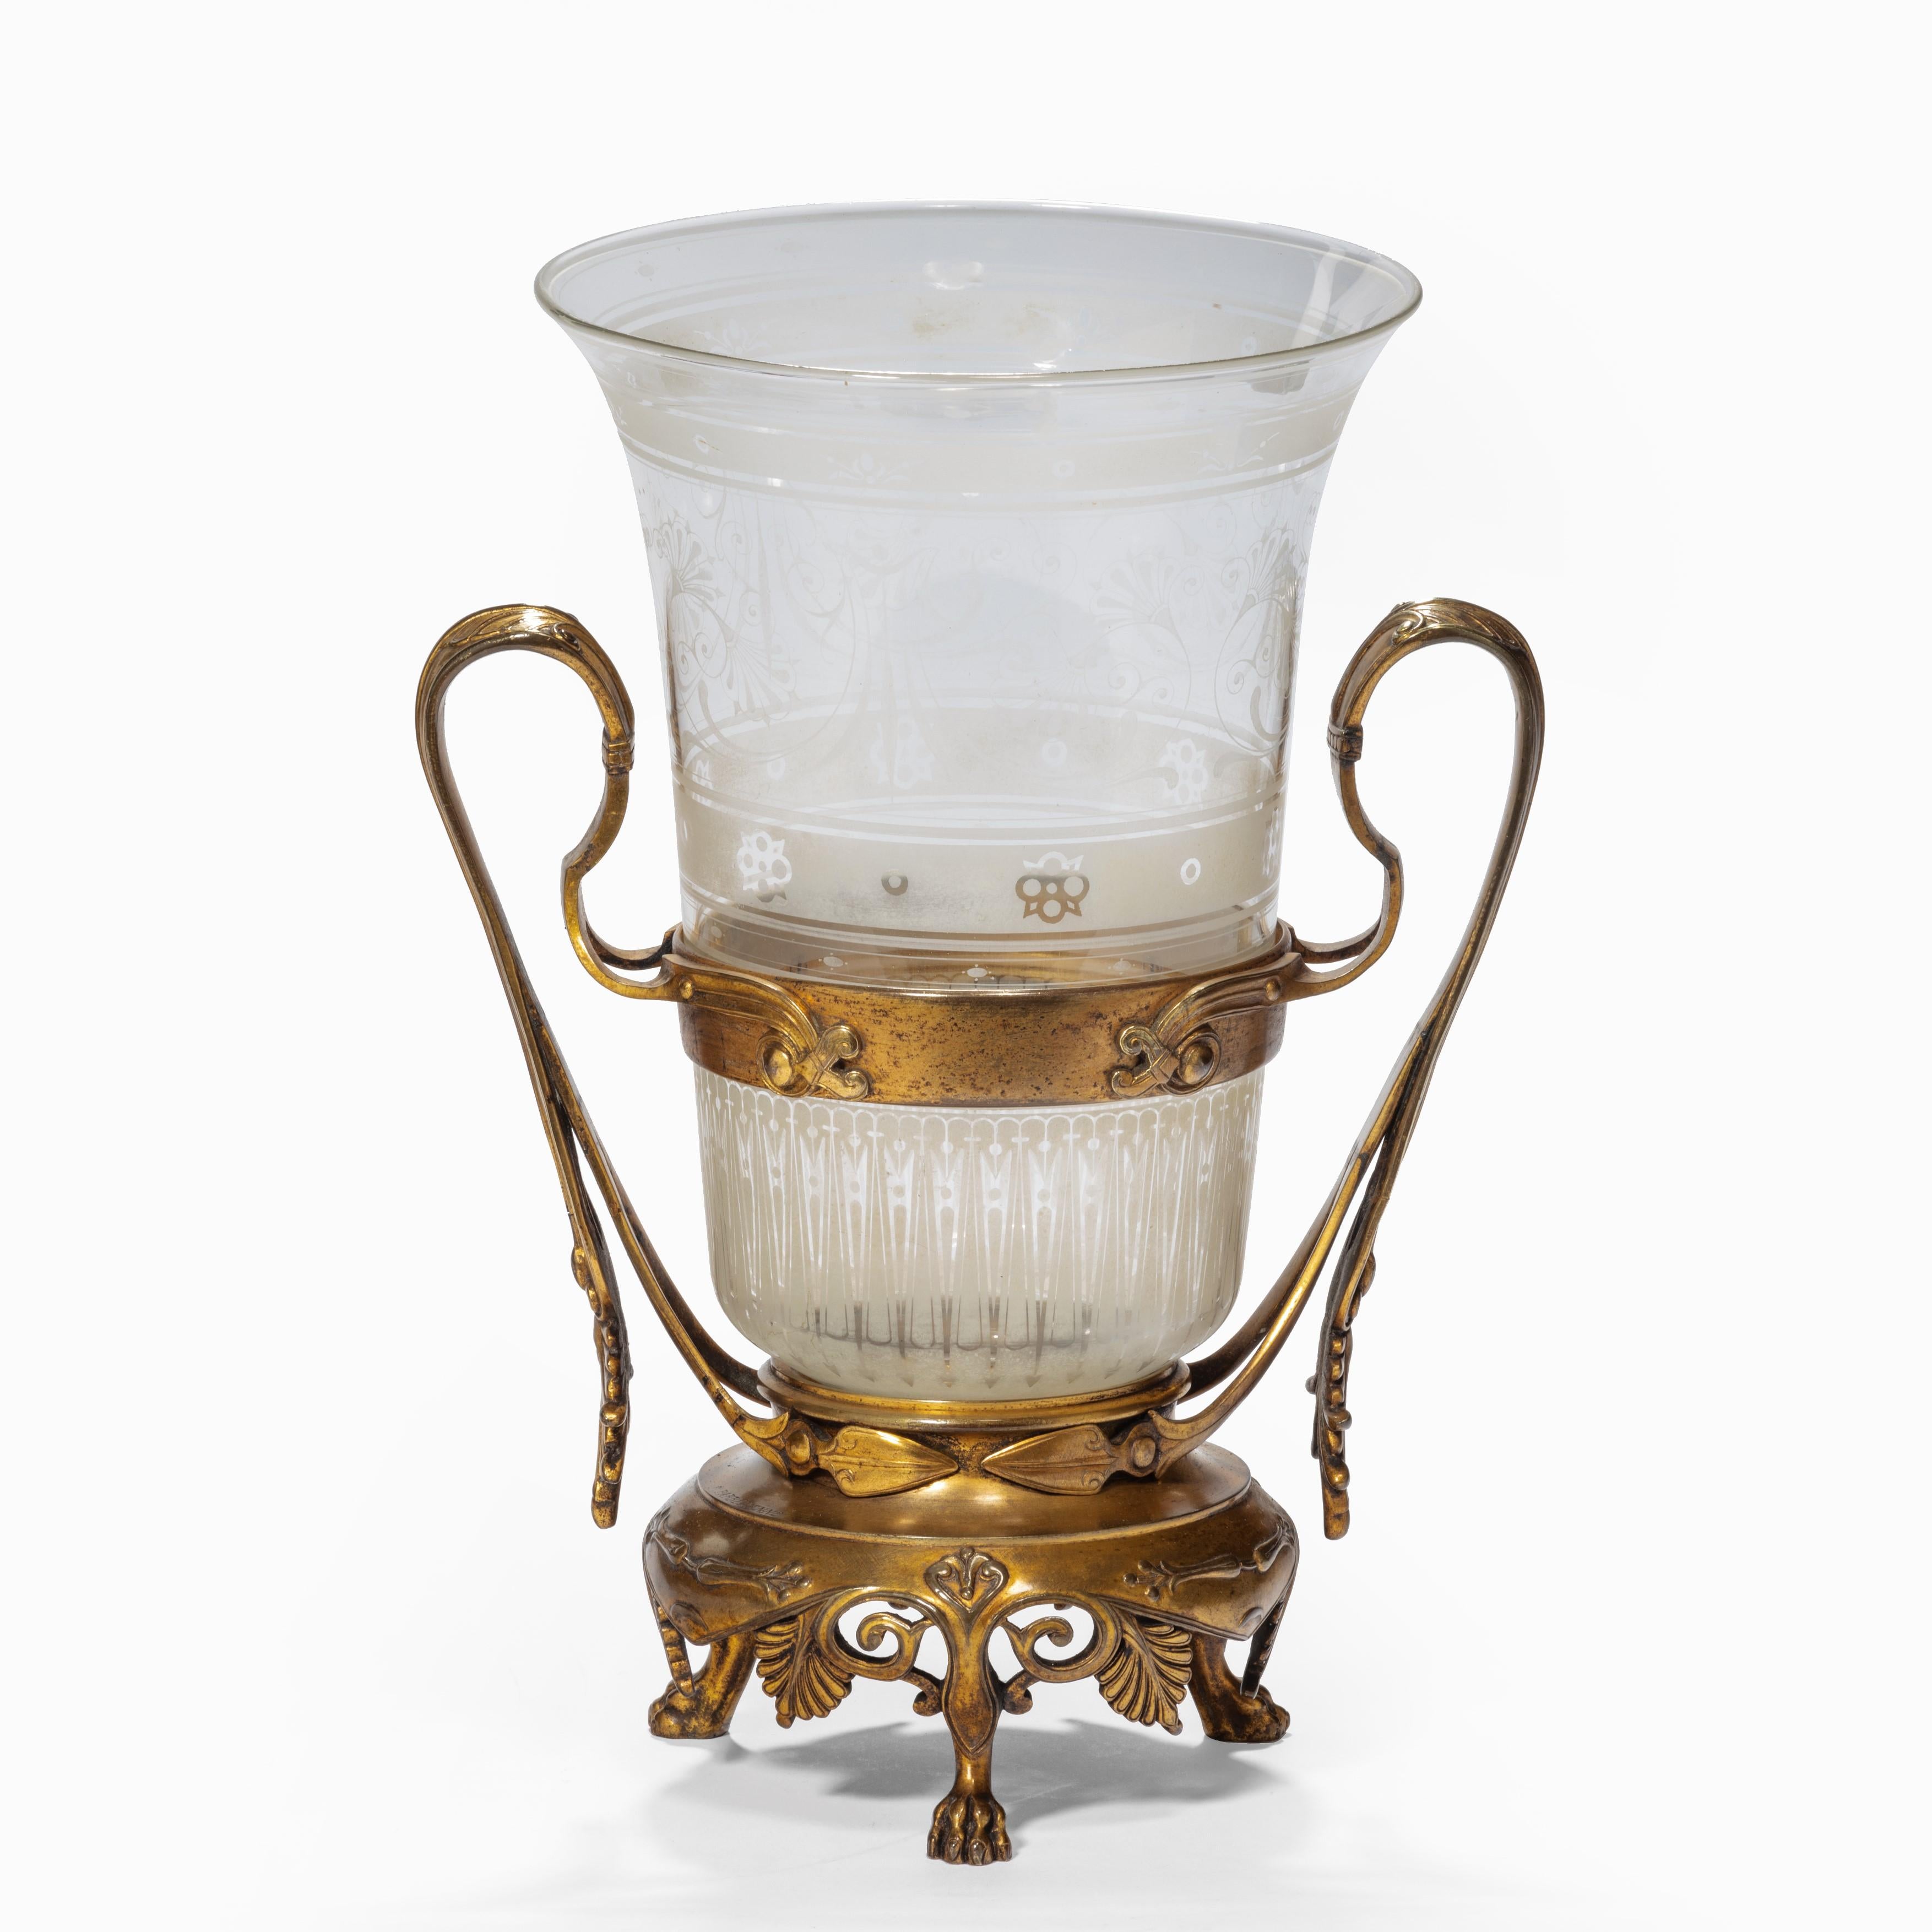 Glass and Ormolu Vase by the Barbedienne Foundry In Good Condition For Sale In Lymington, Hampshire